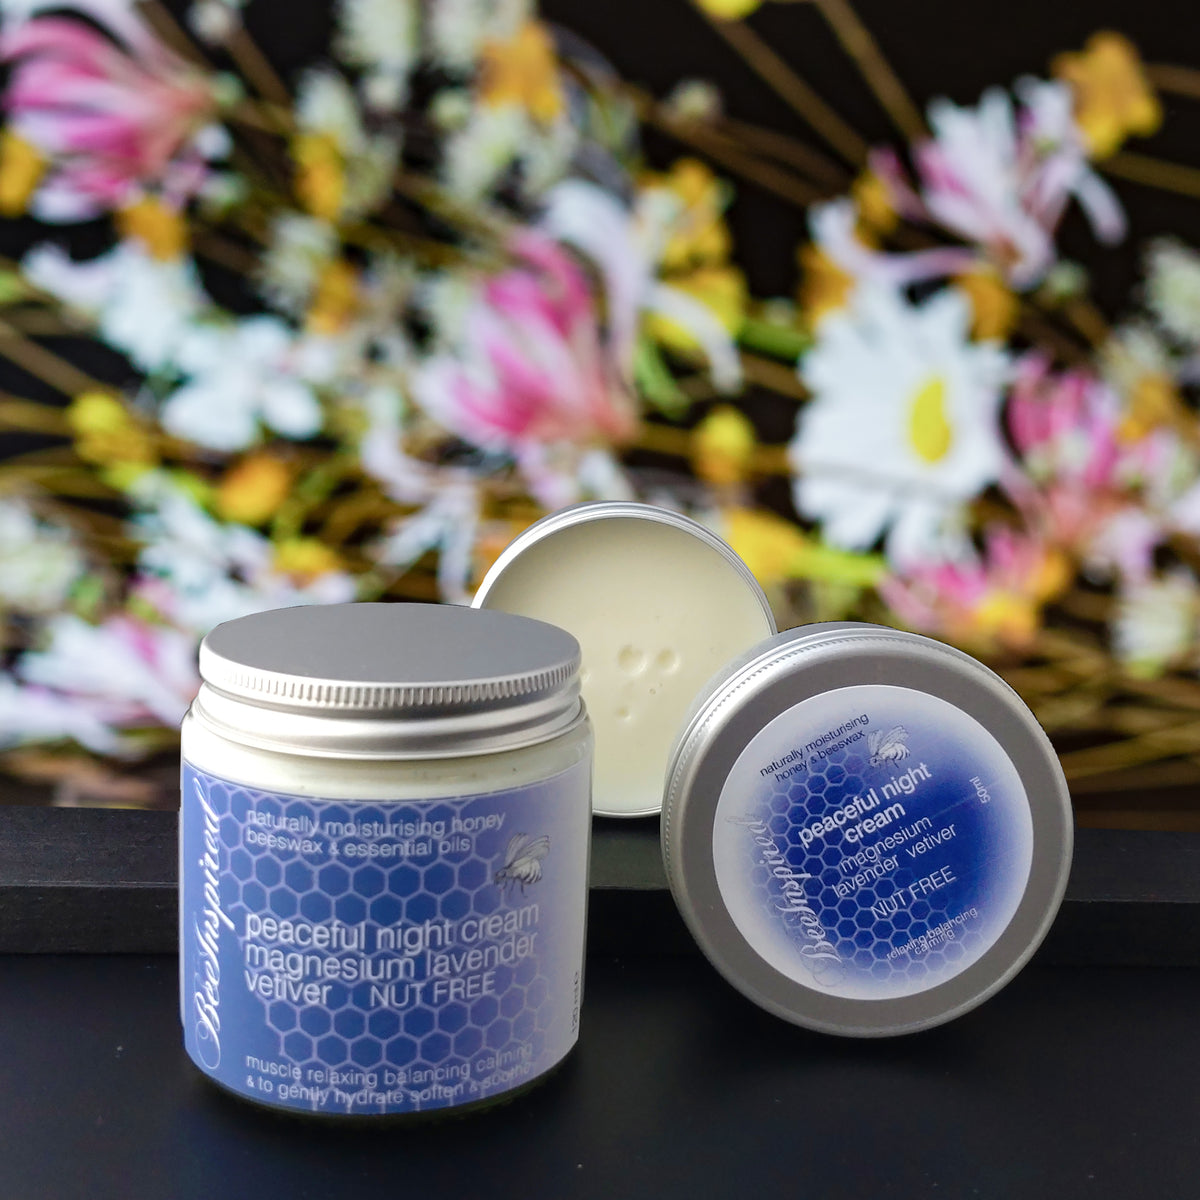 Peaceful Night Cream with Magnesium, vetiver and lavender NUT FREE